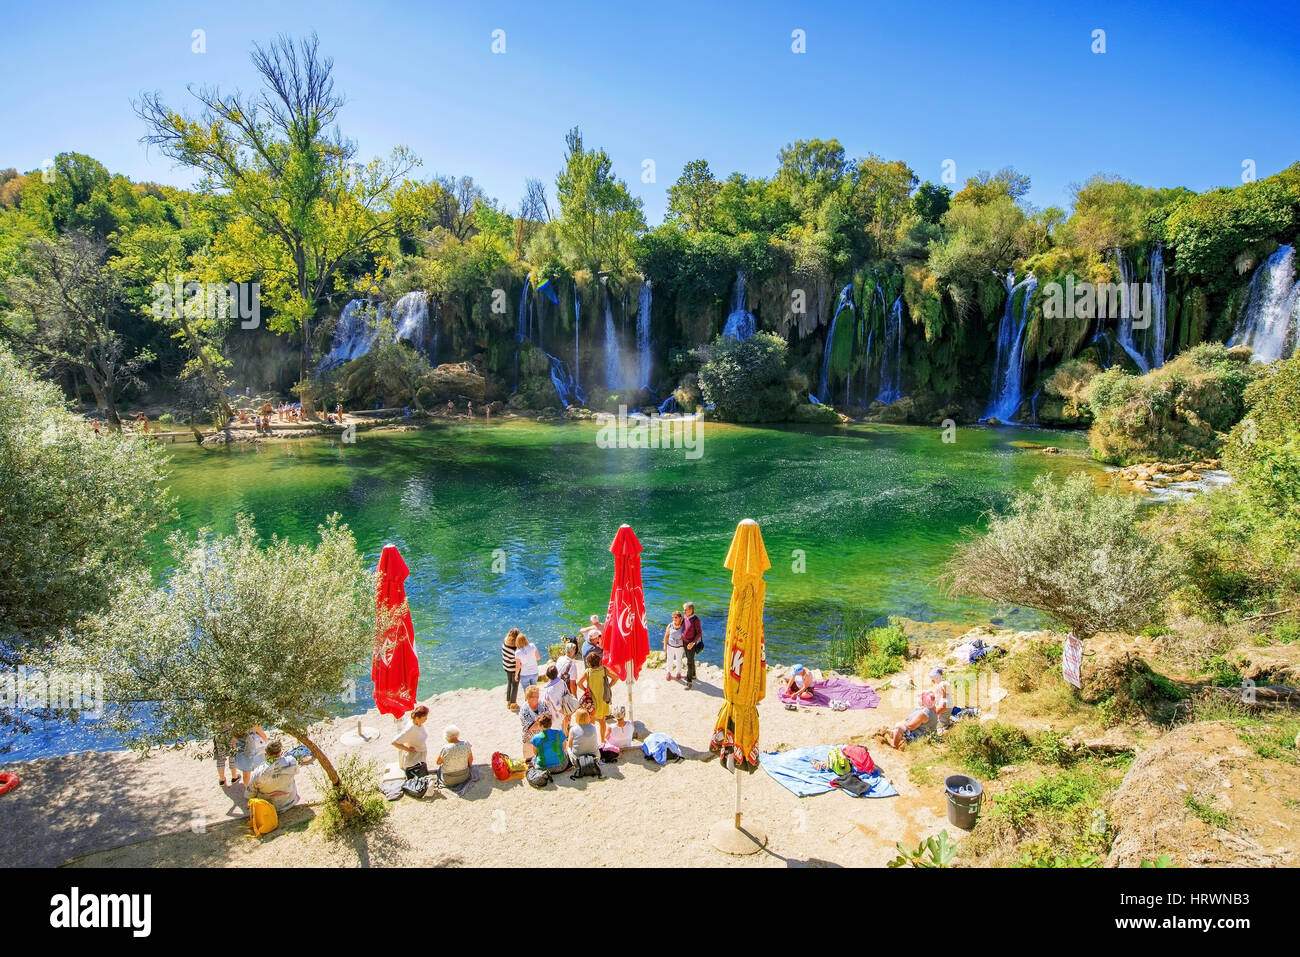 KRAVICE WATERFALLS, BOSNIA AND HERZEGOVINA - SEPTEMBER 23: This is a view of Kravice waterfalls it is a famous landmark and popular tourist destinatio Stock Photo